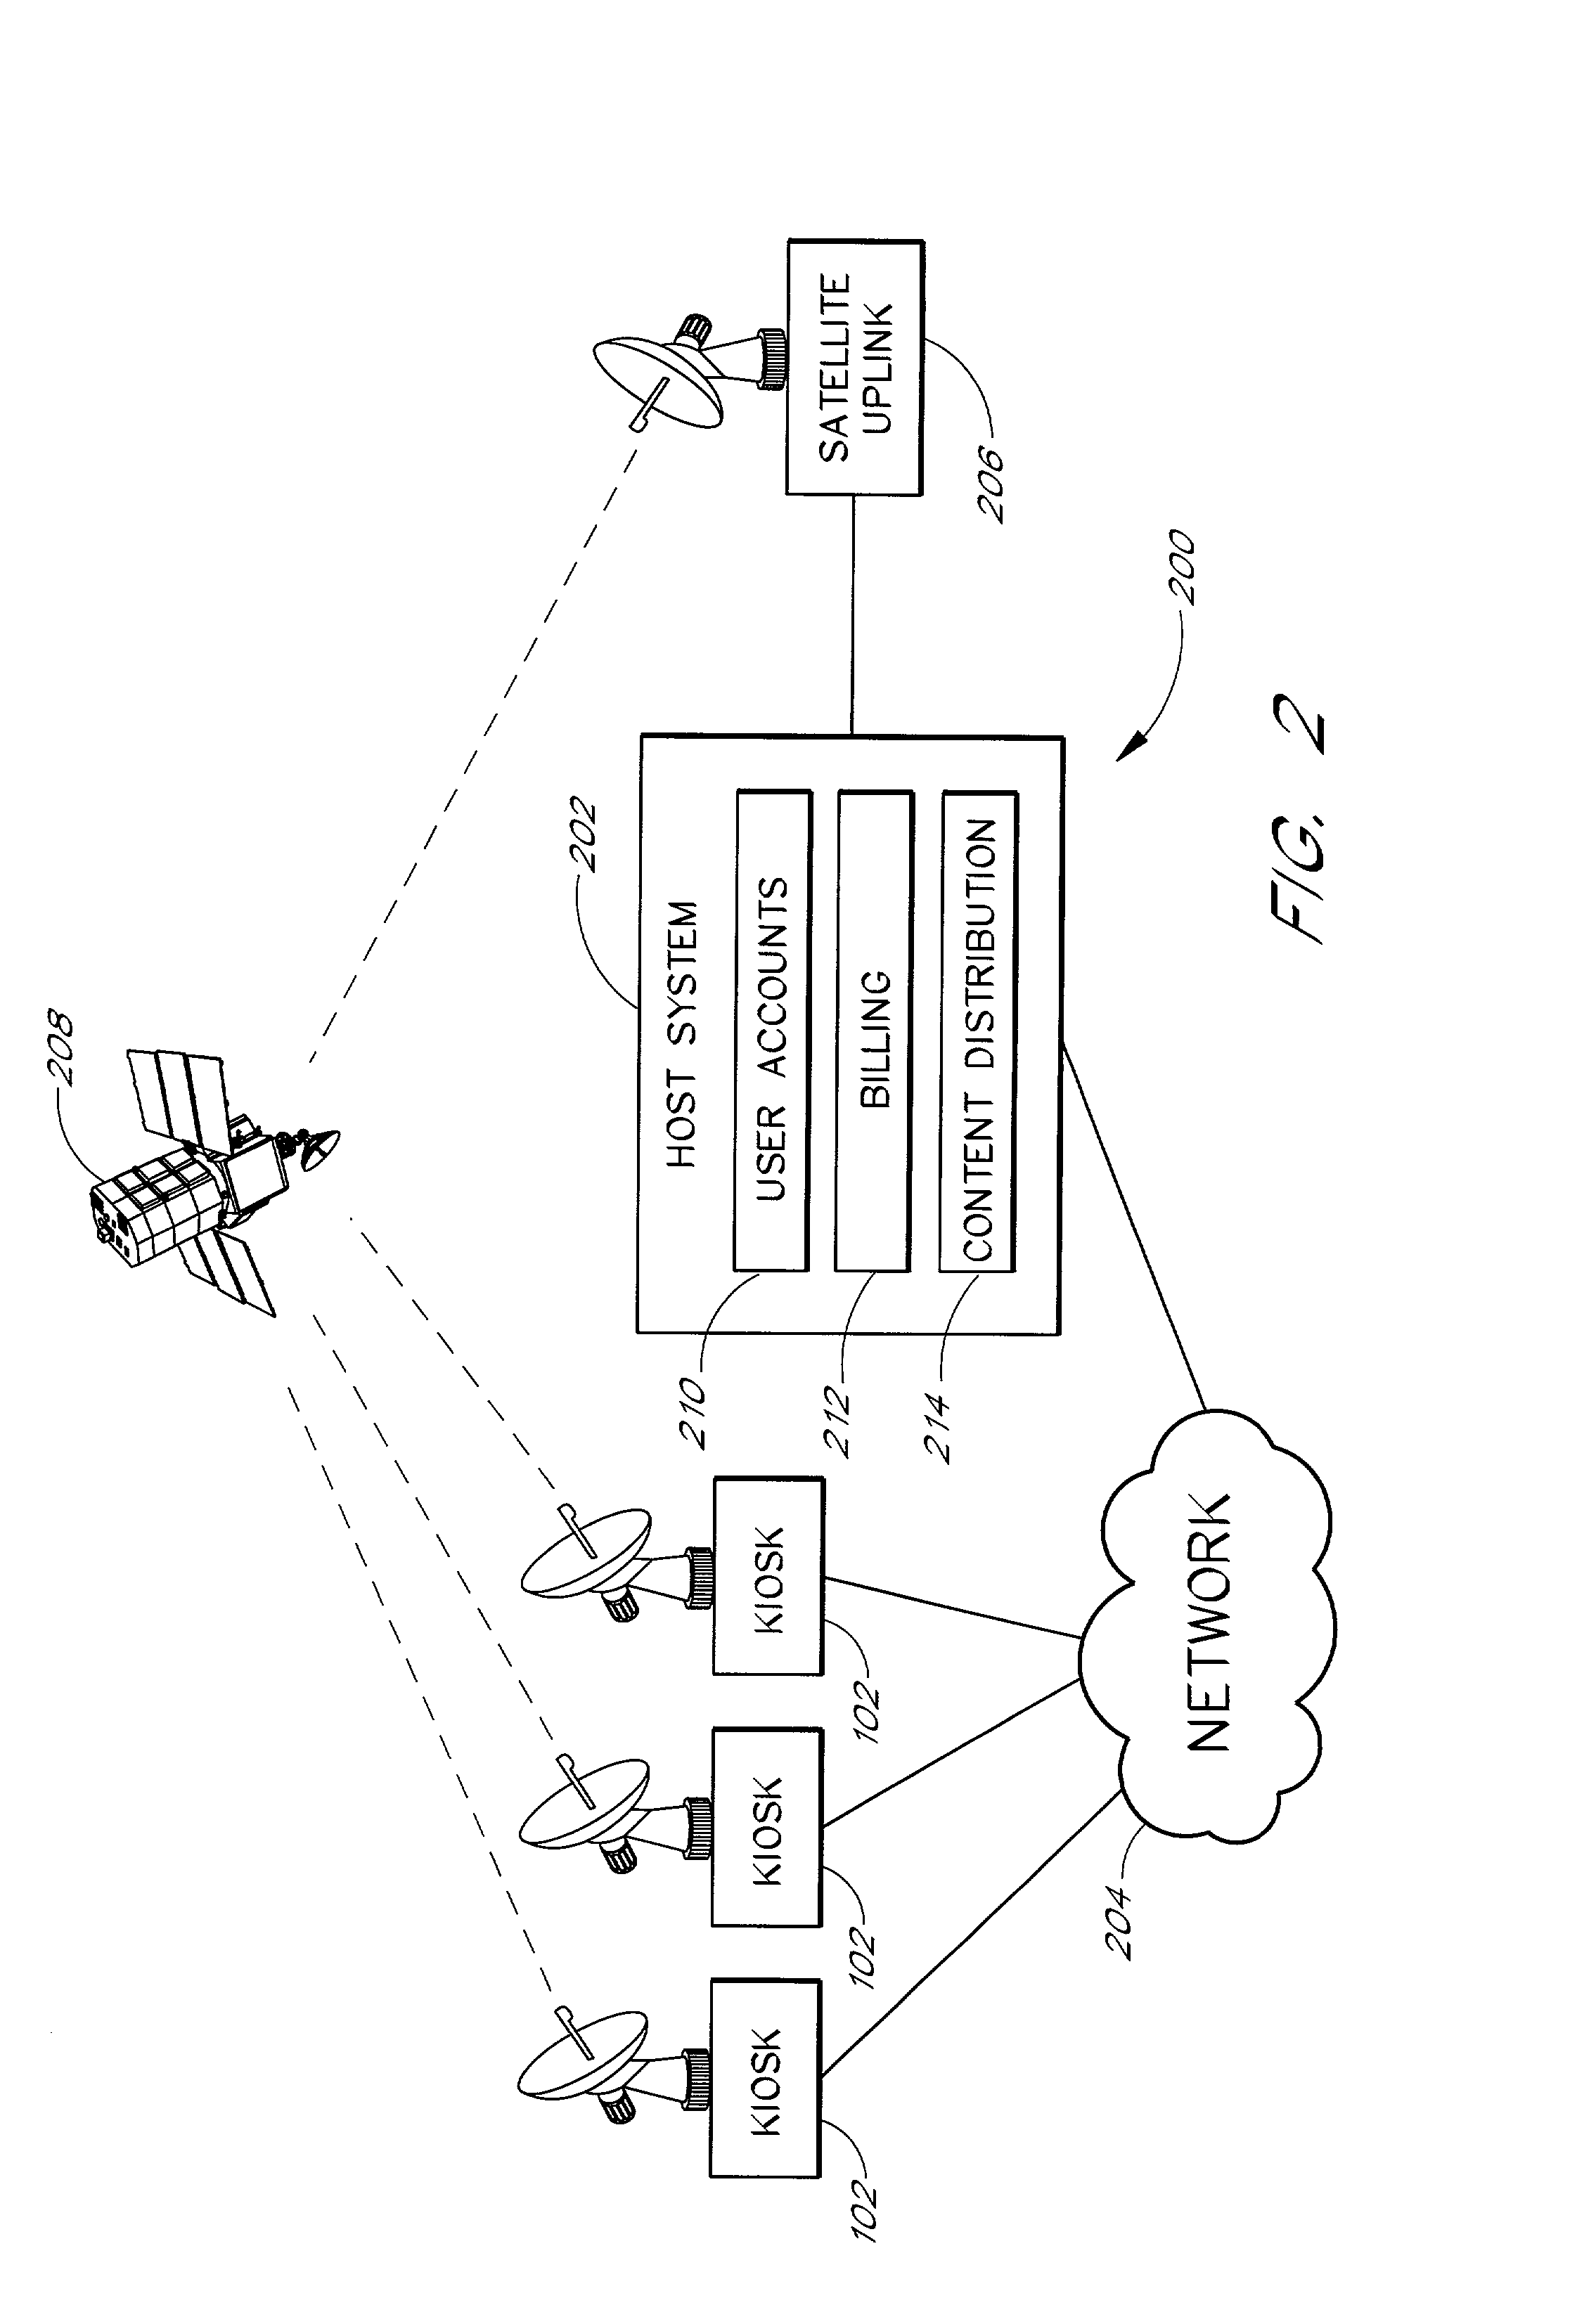 Video content distribution system including an interactive kiosk, a portable content storage device, and a set-top box